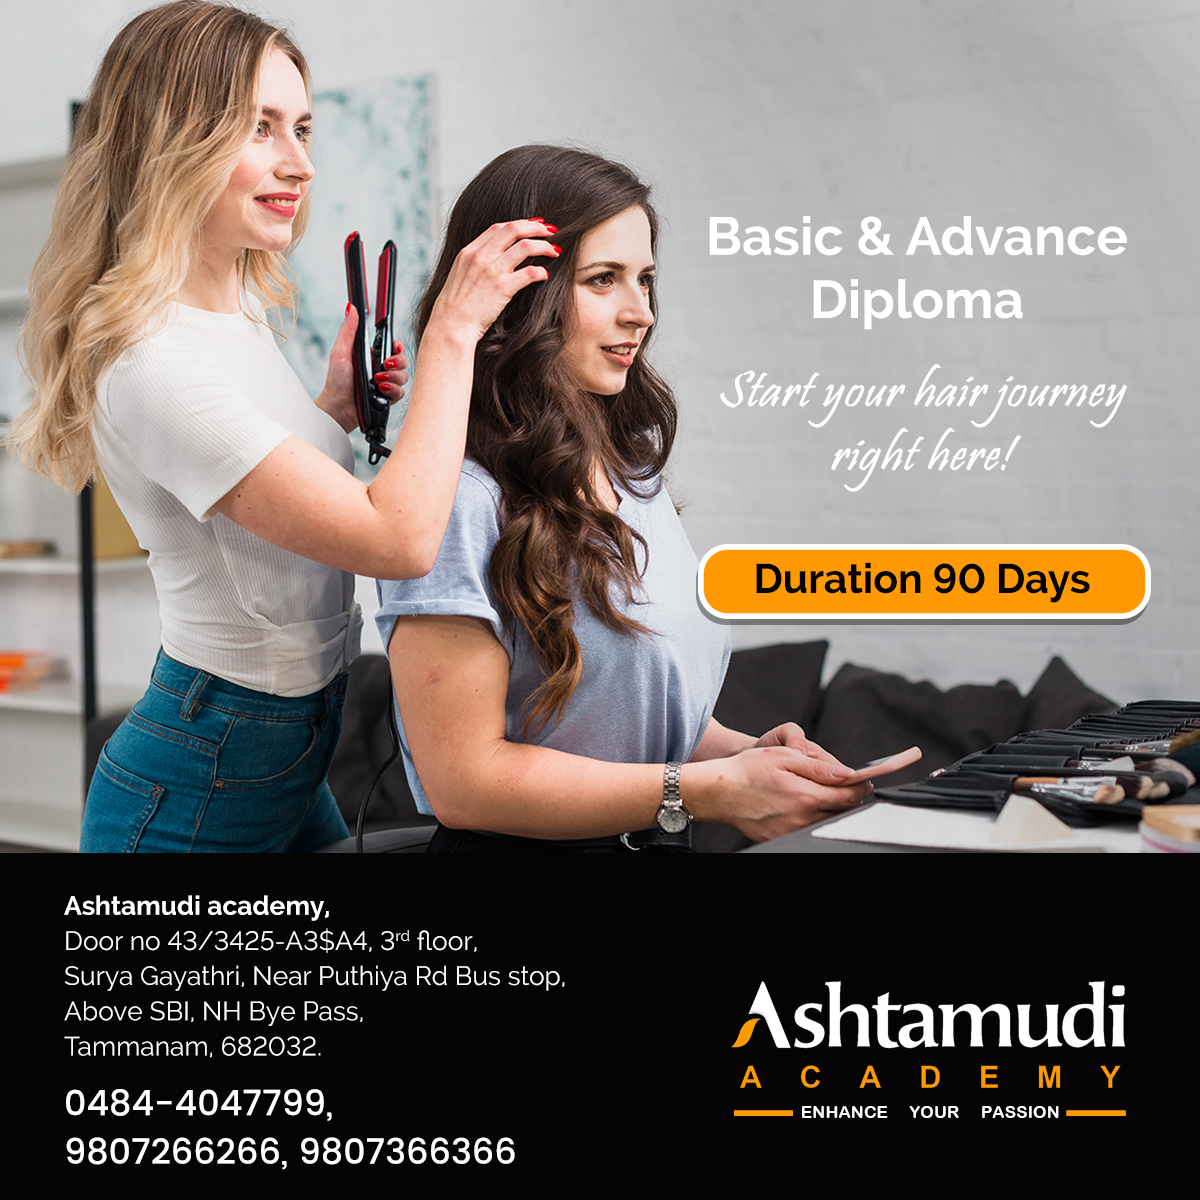 We offer professional hair classes with the basics and advanced techniques.
#Beauty
#Makeup
#Fashion
#SkinCare
#Beautician
#HairCourse
#MakeupArtist
#MakeupCareer
#MakeupTraining
#MakeupCourses
#MakeupAcademy
#BeautyandFashion
#MakeupWorkshop
#HairStyleWorkshop
#AshtamudiAcademy